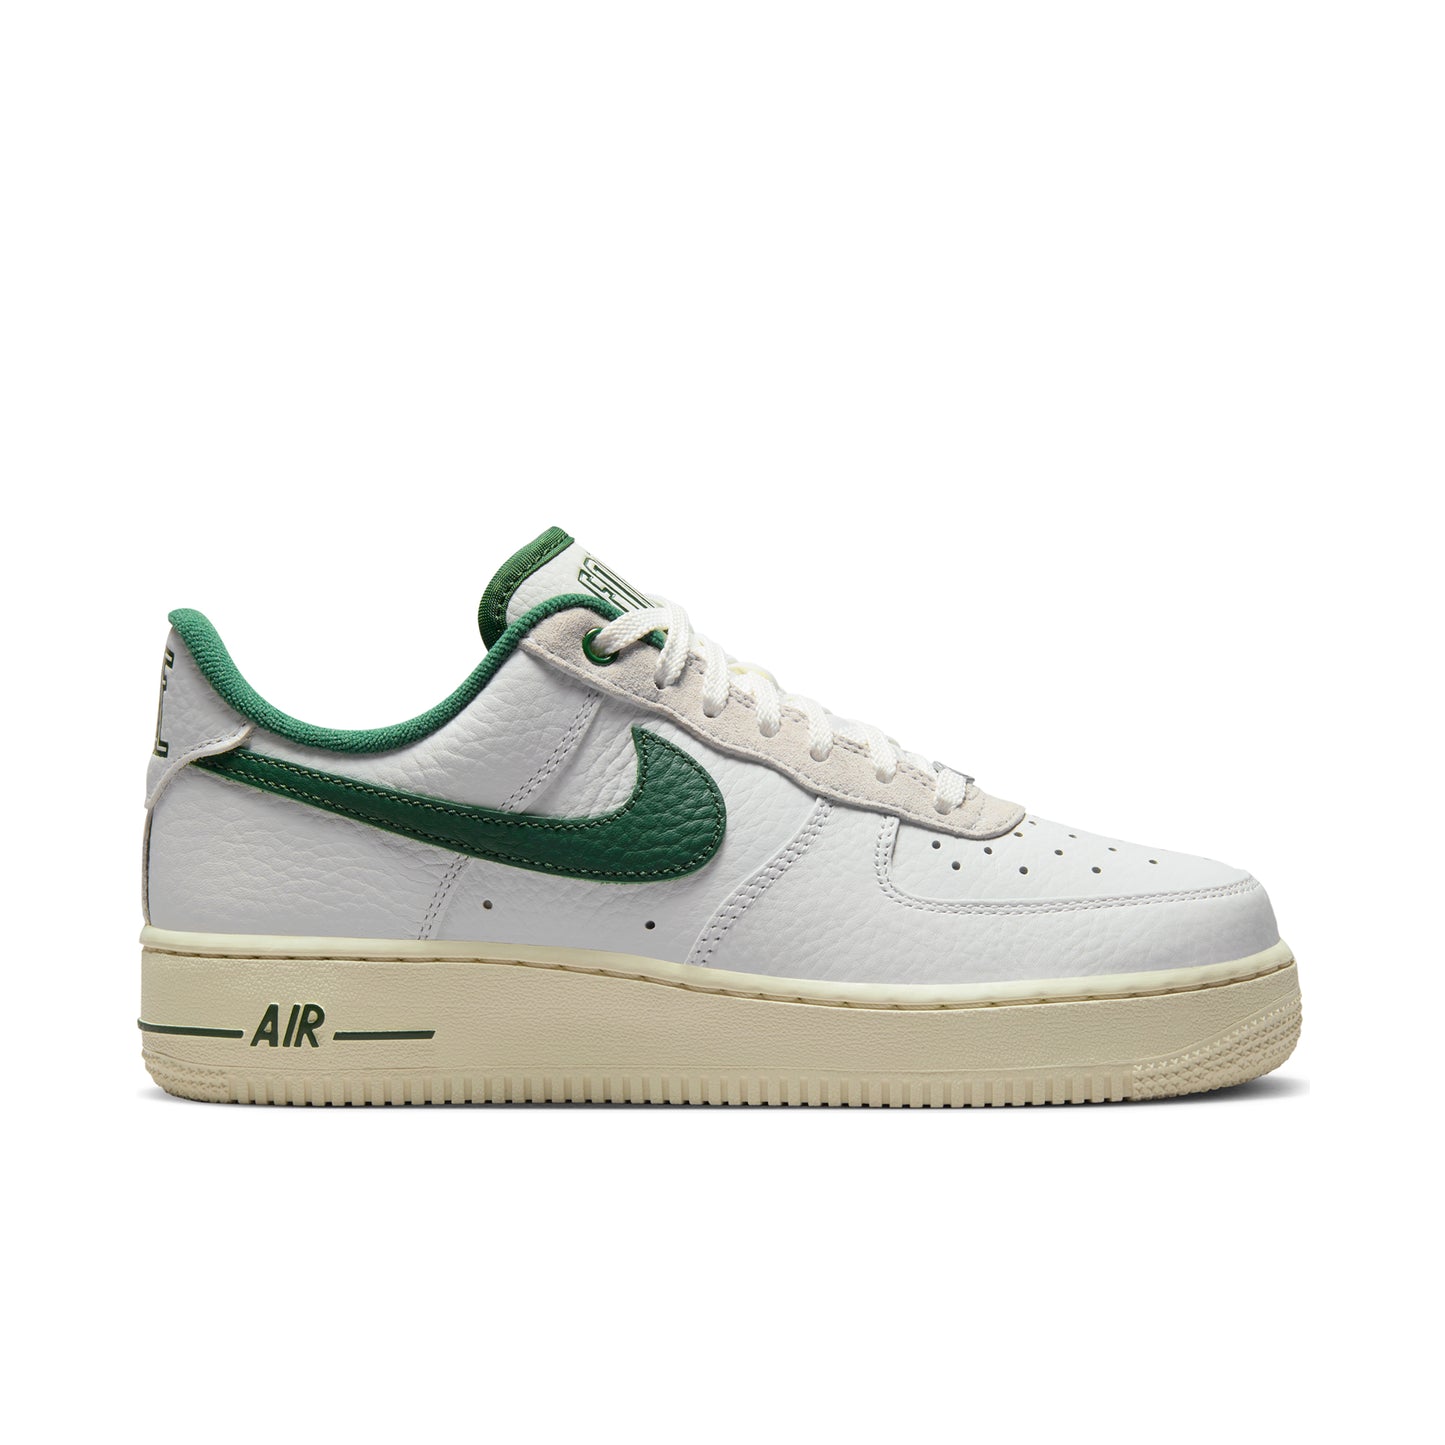 Nike Air Force 1 Low '07 LX Command Force Gorge Green W